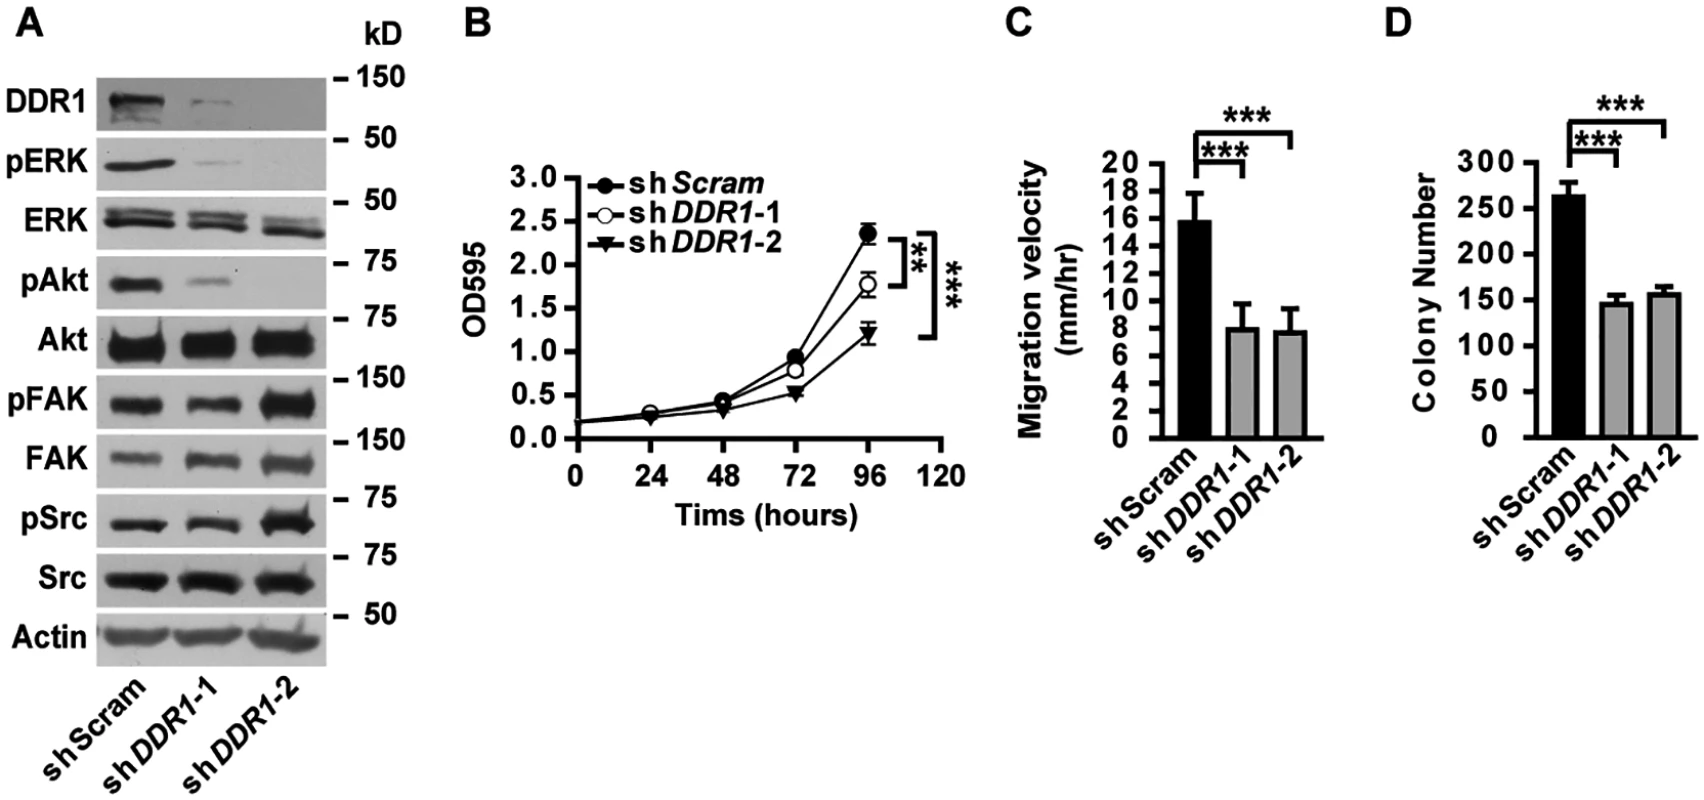 DDR1 is required for ERK activation, cell proliferation and migration in lung cancer cells.